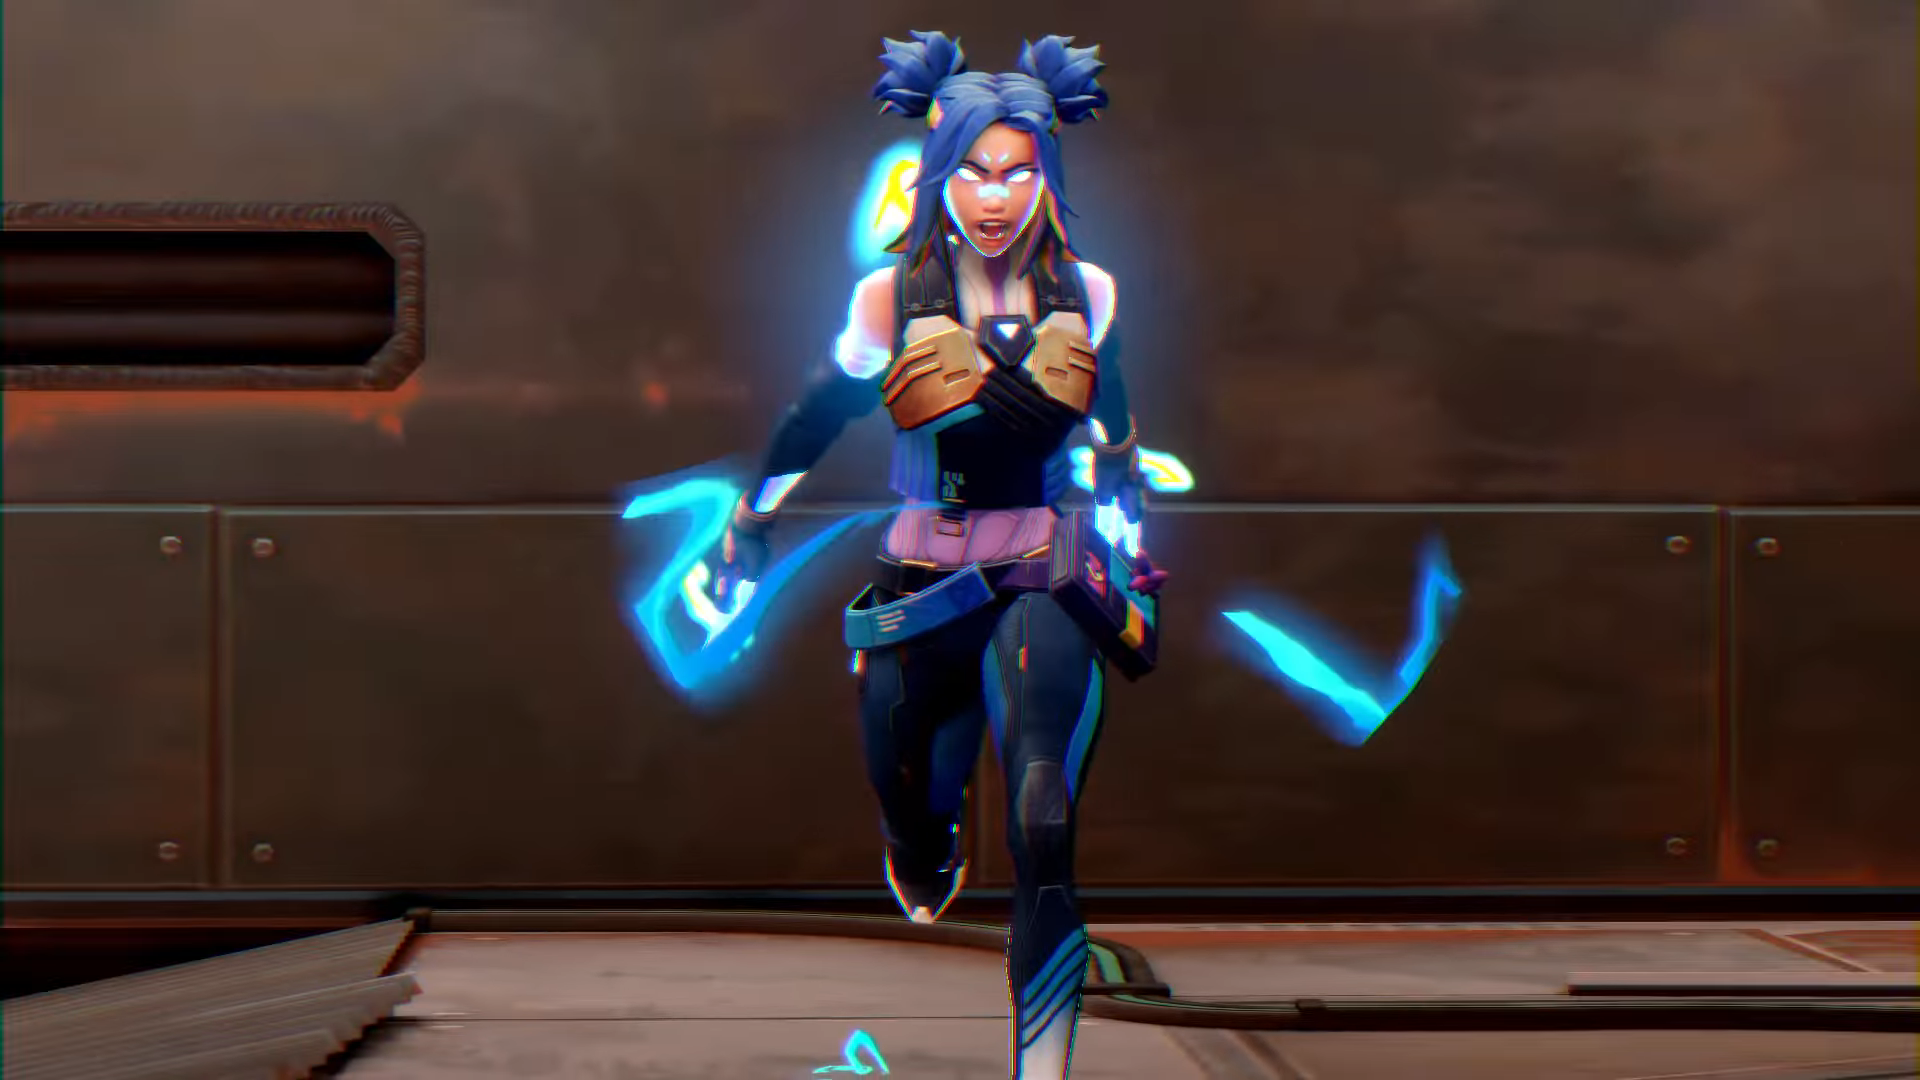 Neon using her High Gear ability